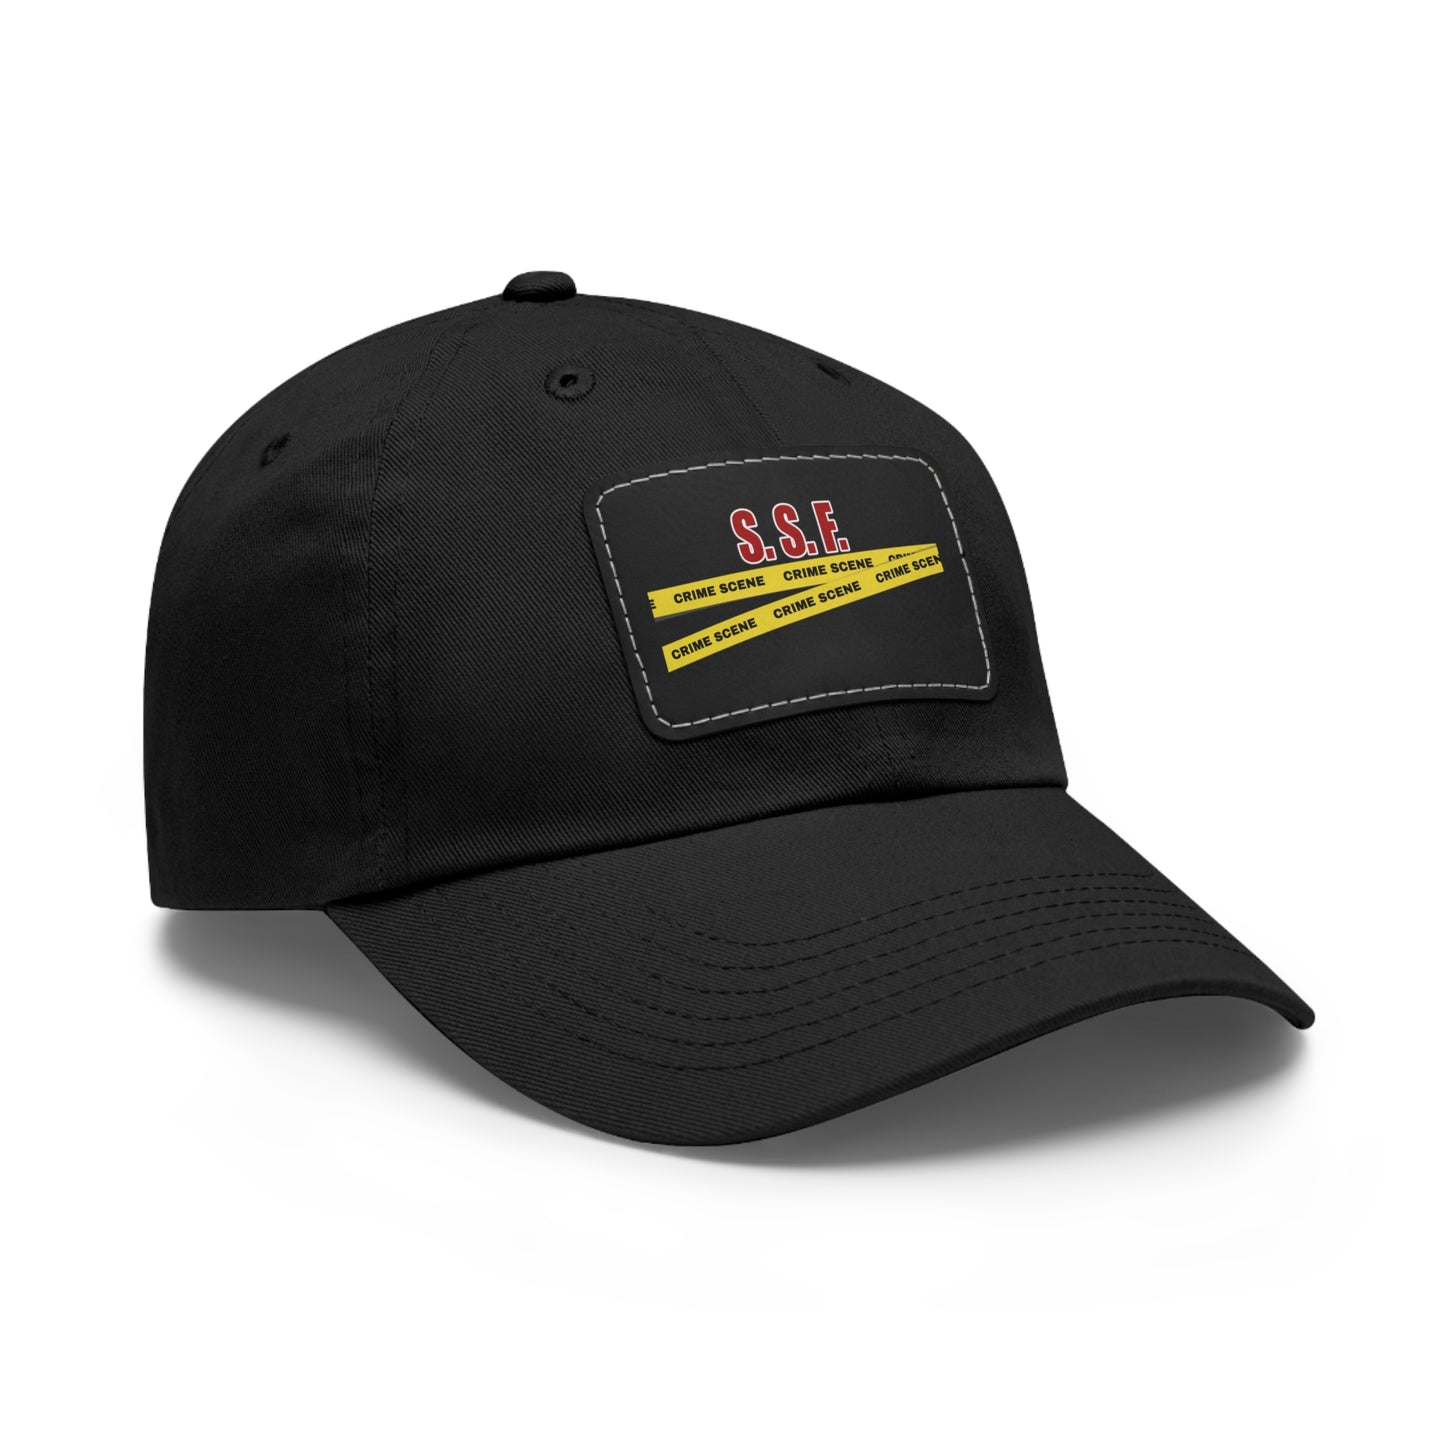 SSF Crime Tape Hat with Leather Patch